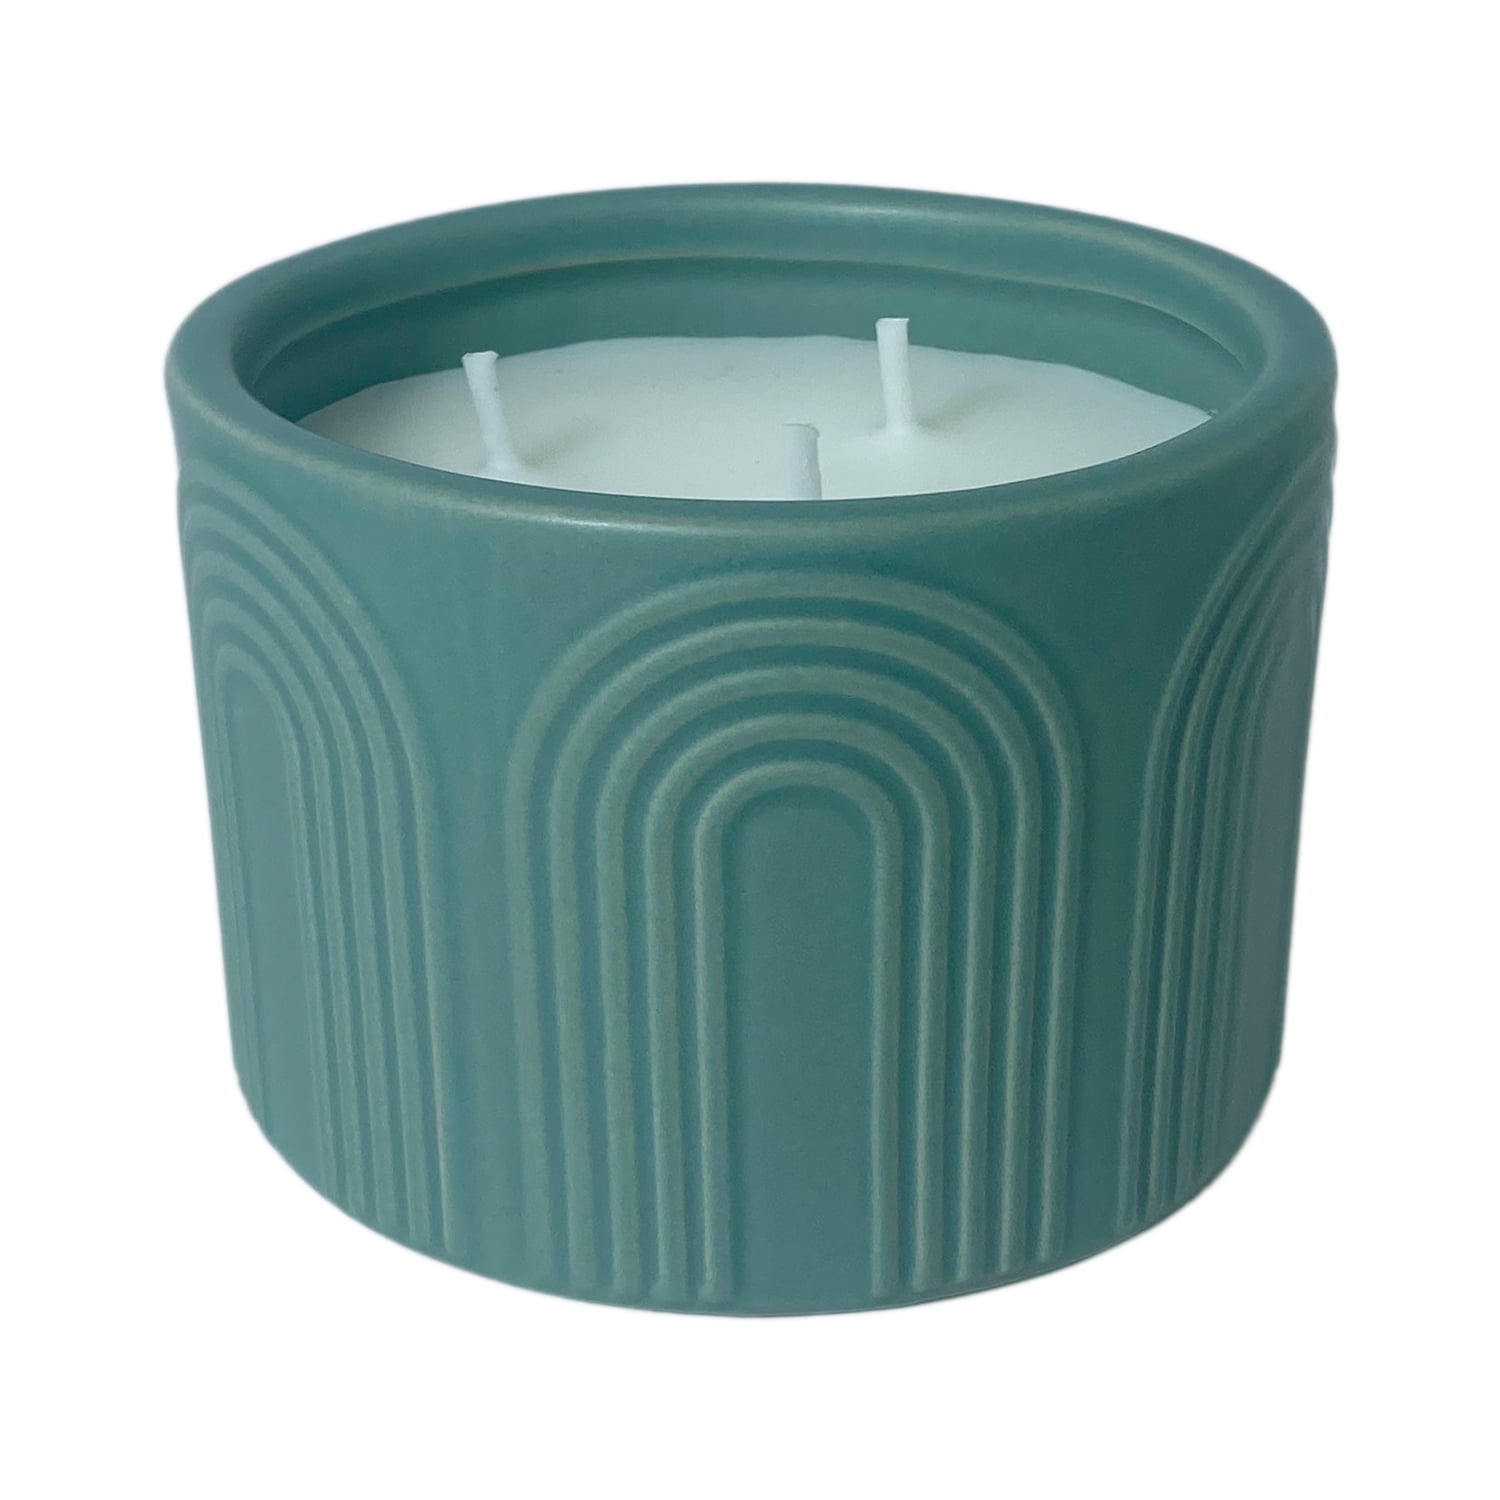 Better Homes & Gardens Citronella, Mint Leaf, and Eucalyptus 12oz Scented Candle, Green